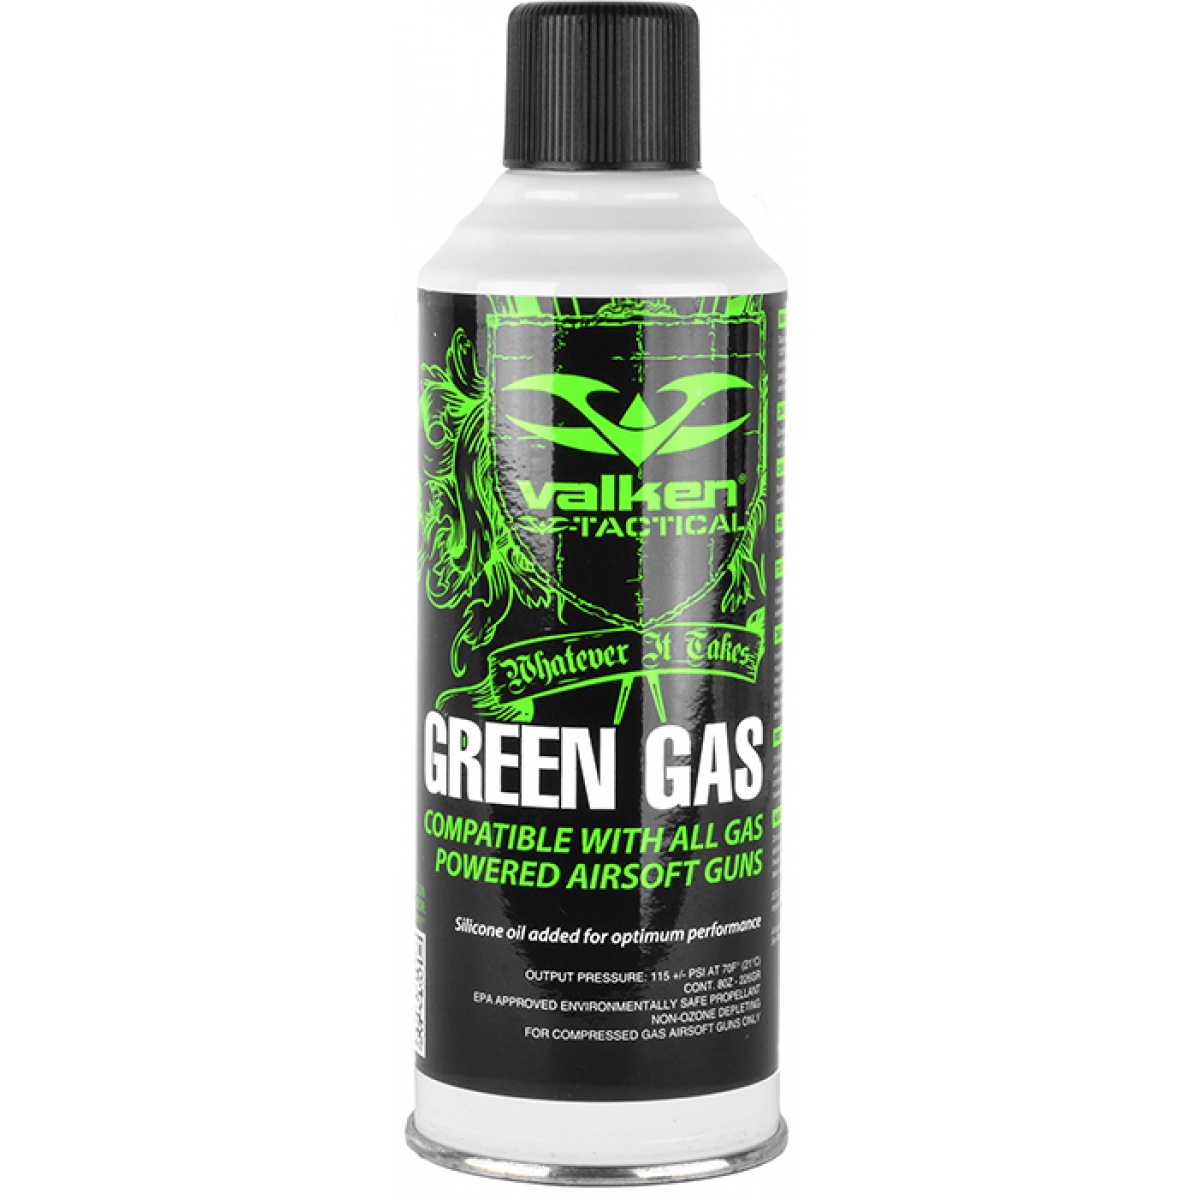 Valken Tactical Airsoft Green Gas for sale online 